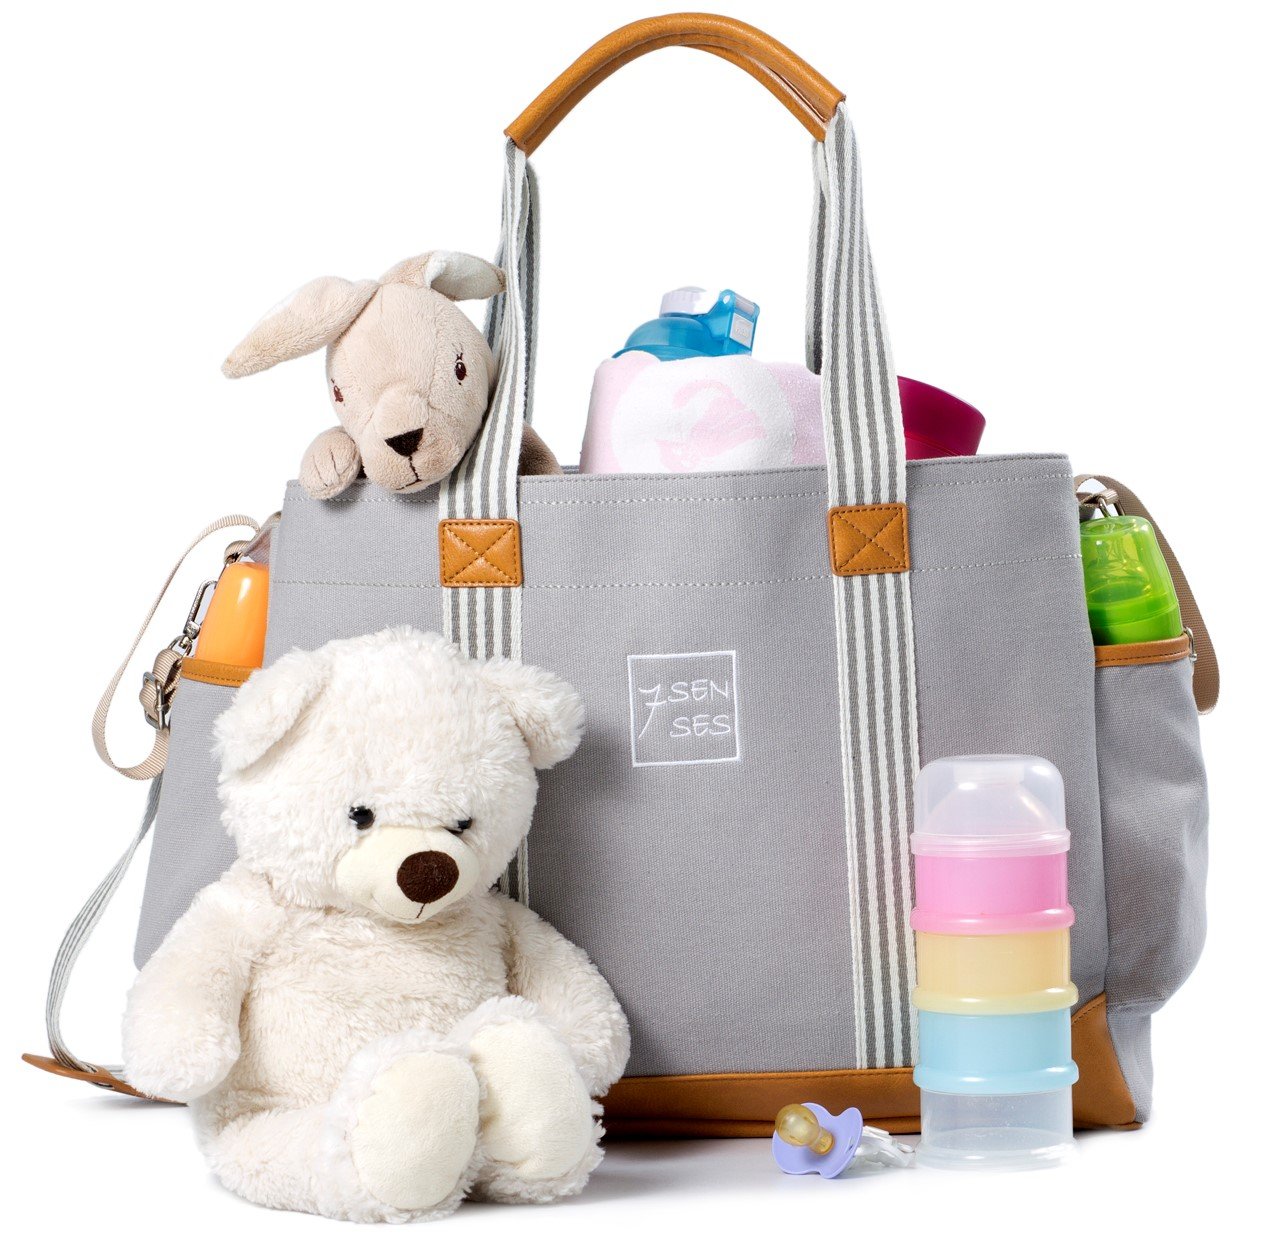 Diaper Bag for Girls and Boys - Large Capacity Baby Bag - Best Baby Shower Gift by 7Senses